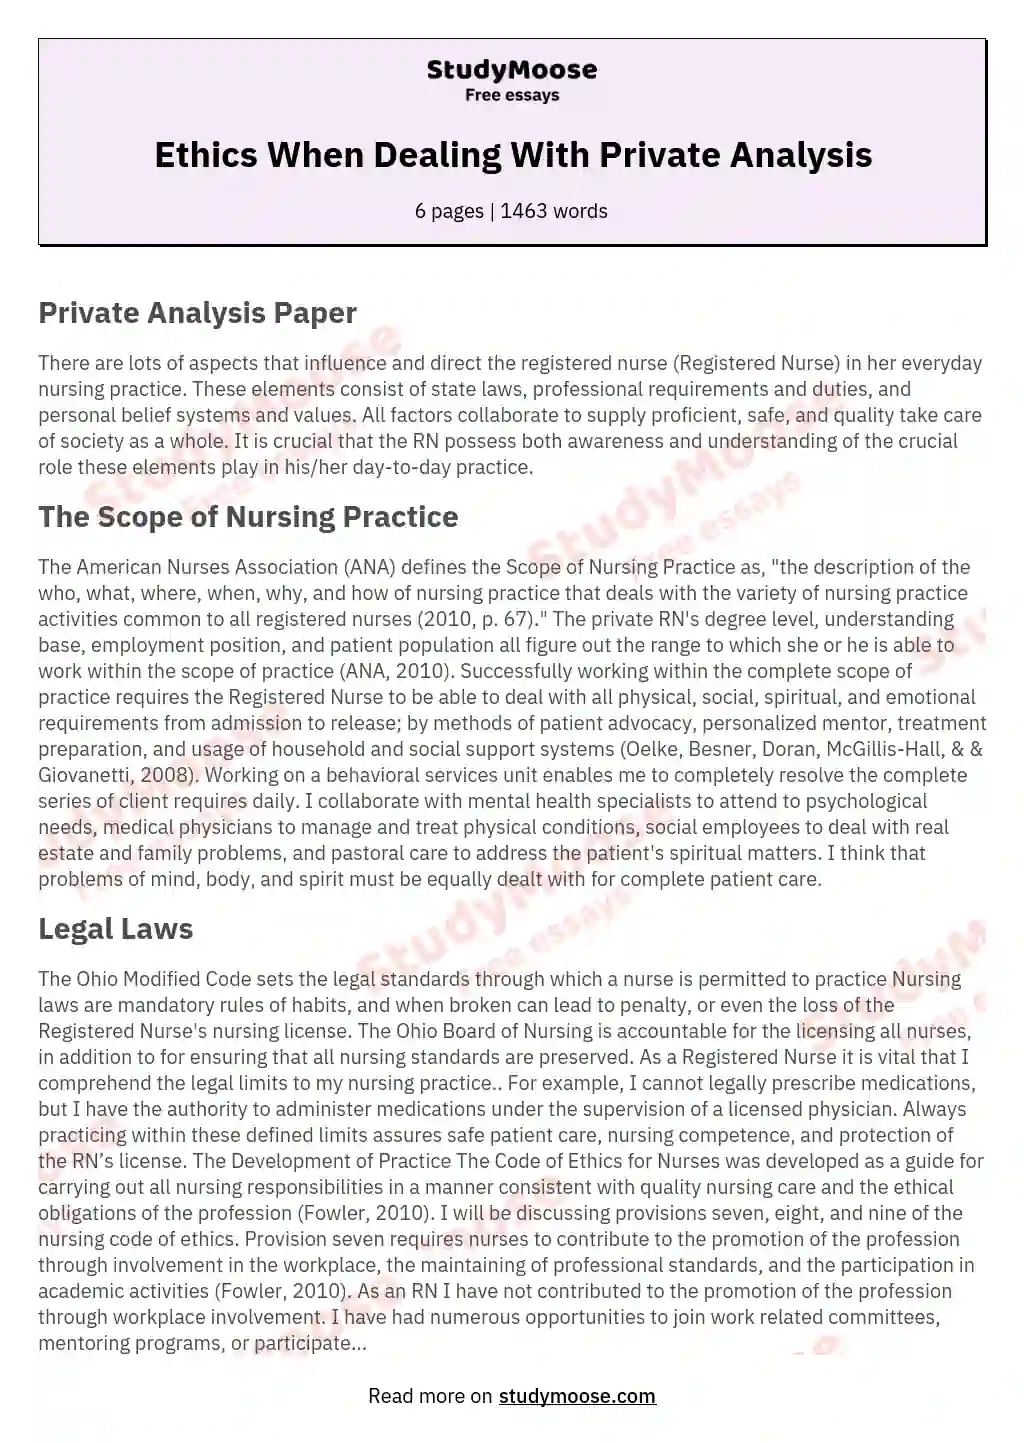 Ethics When Dealing With Private Analysis essay